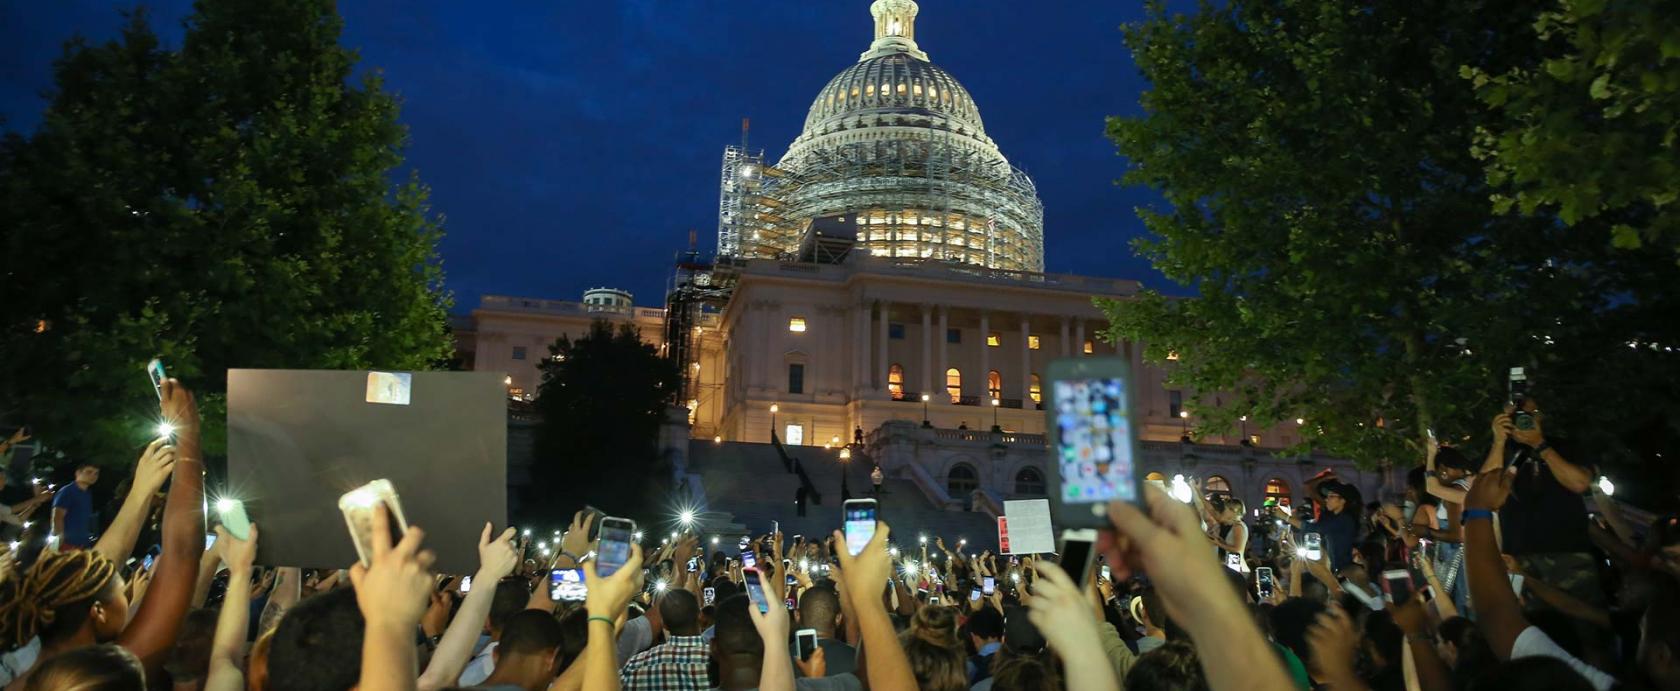 Vigil in Front of the U.S. Capitol Building - Night